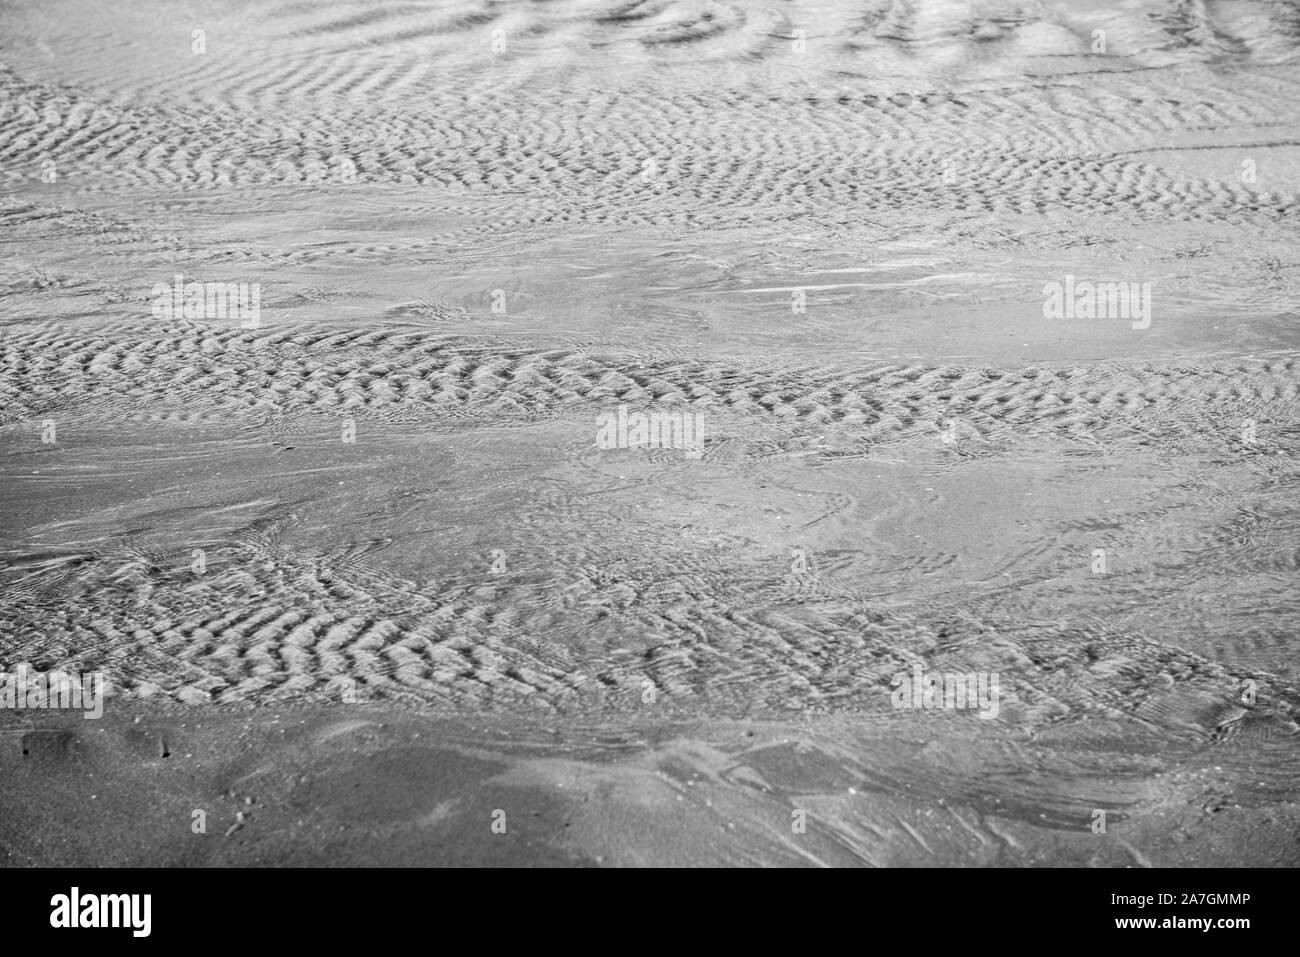 water moving over sand in monochrome with slight waves and a little movement blur to indicate movement. Lovely texture and mood with sand patterns. Stock Photo